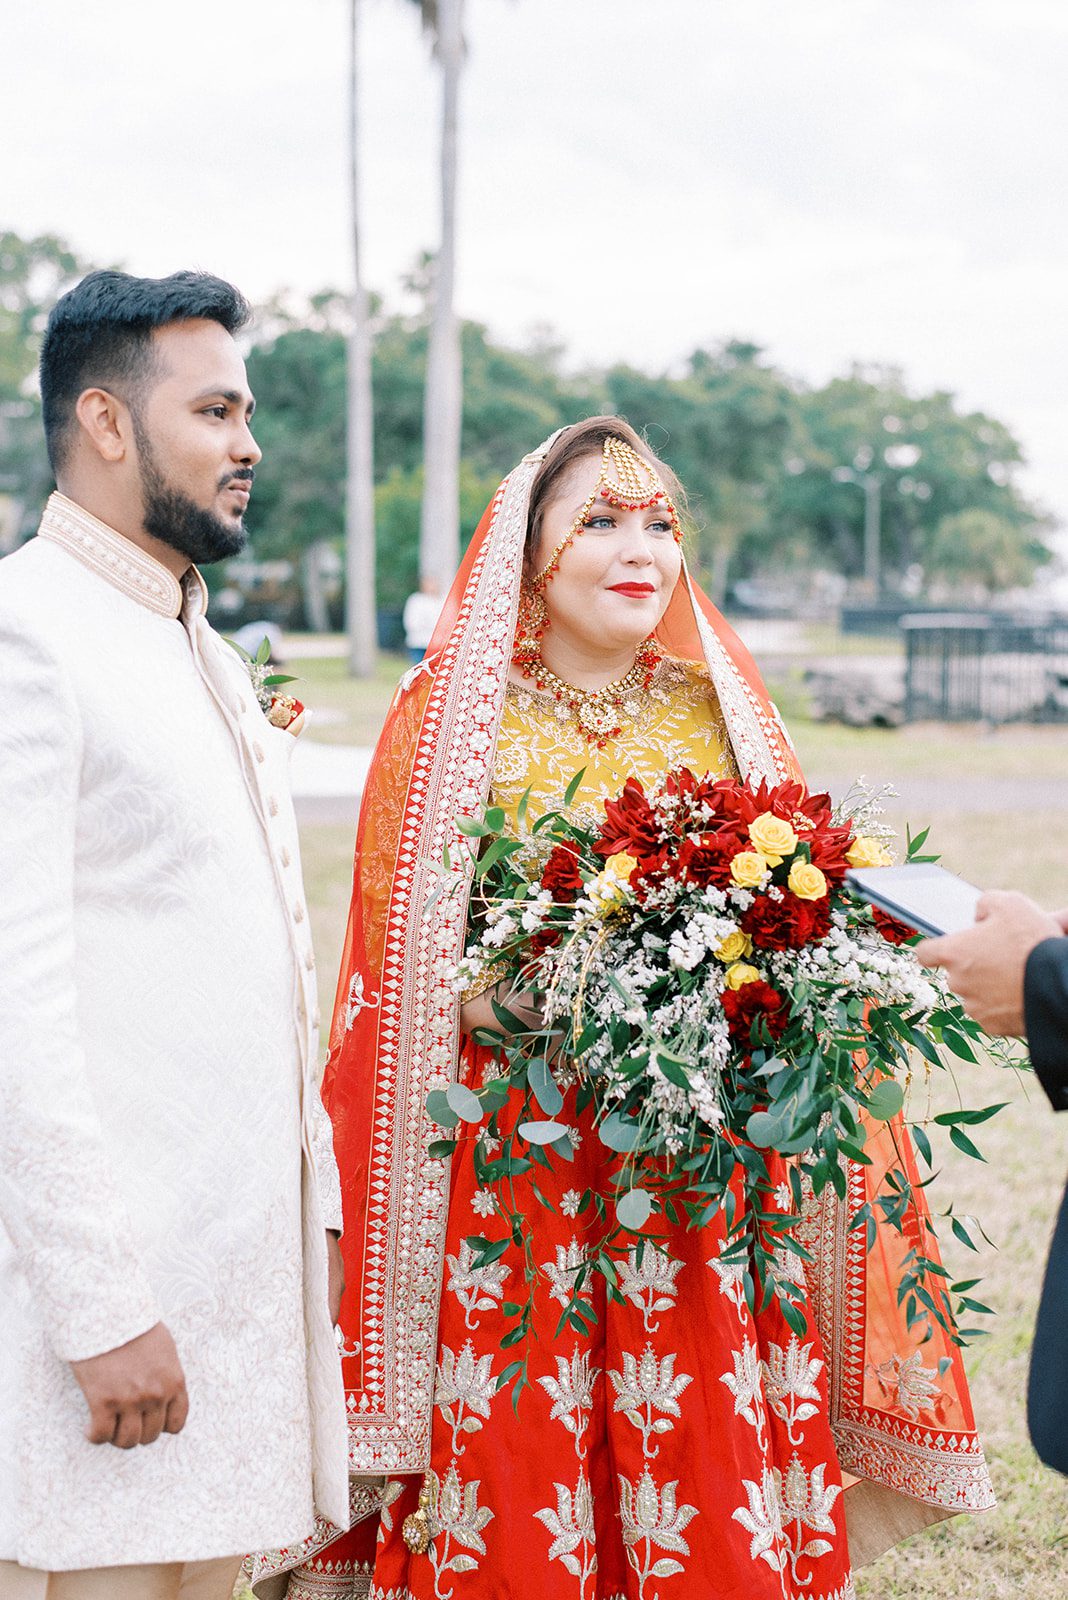 Indian bride and groom in Florida getting married on a beach with their closest friends and family while wearing traditional clothing